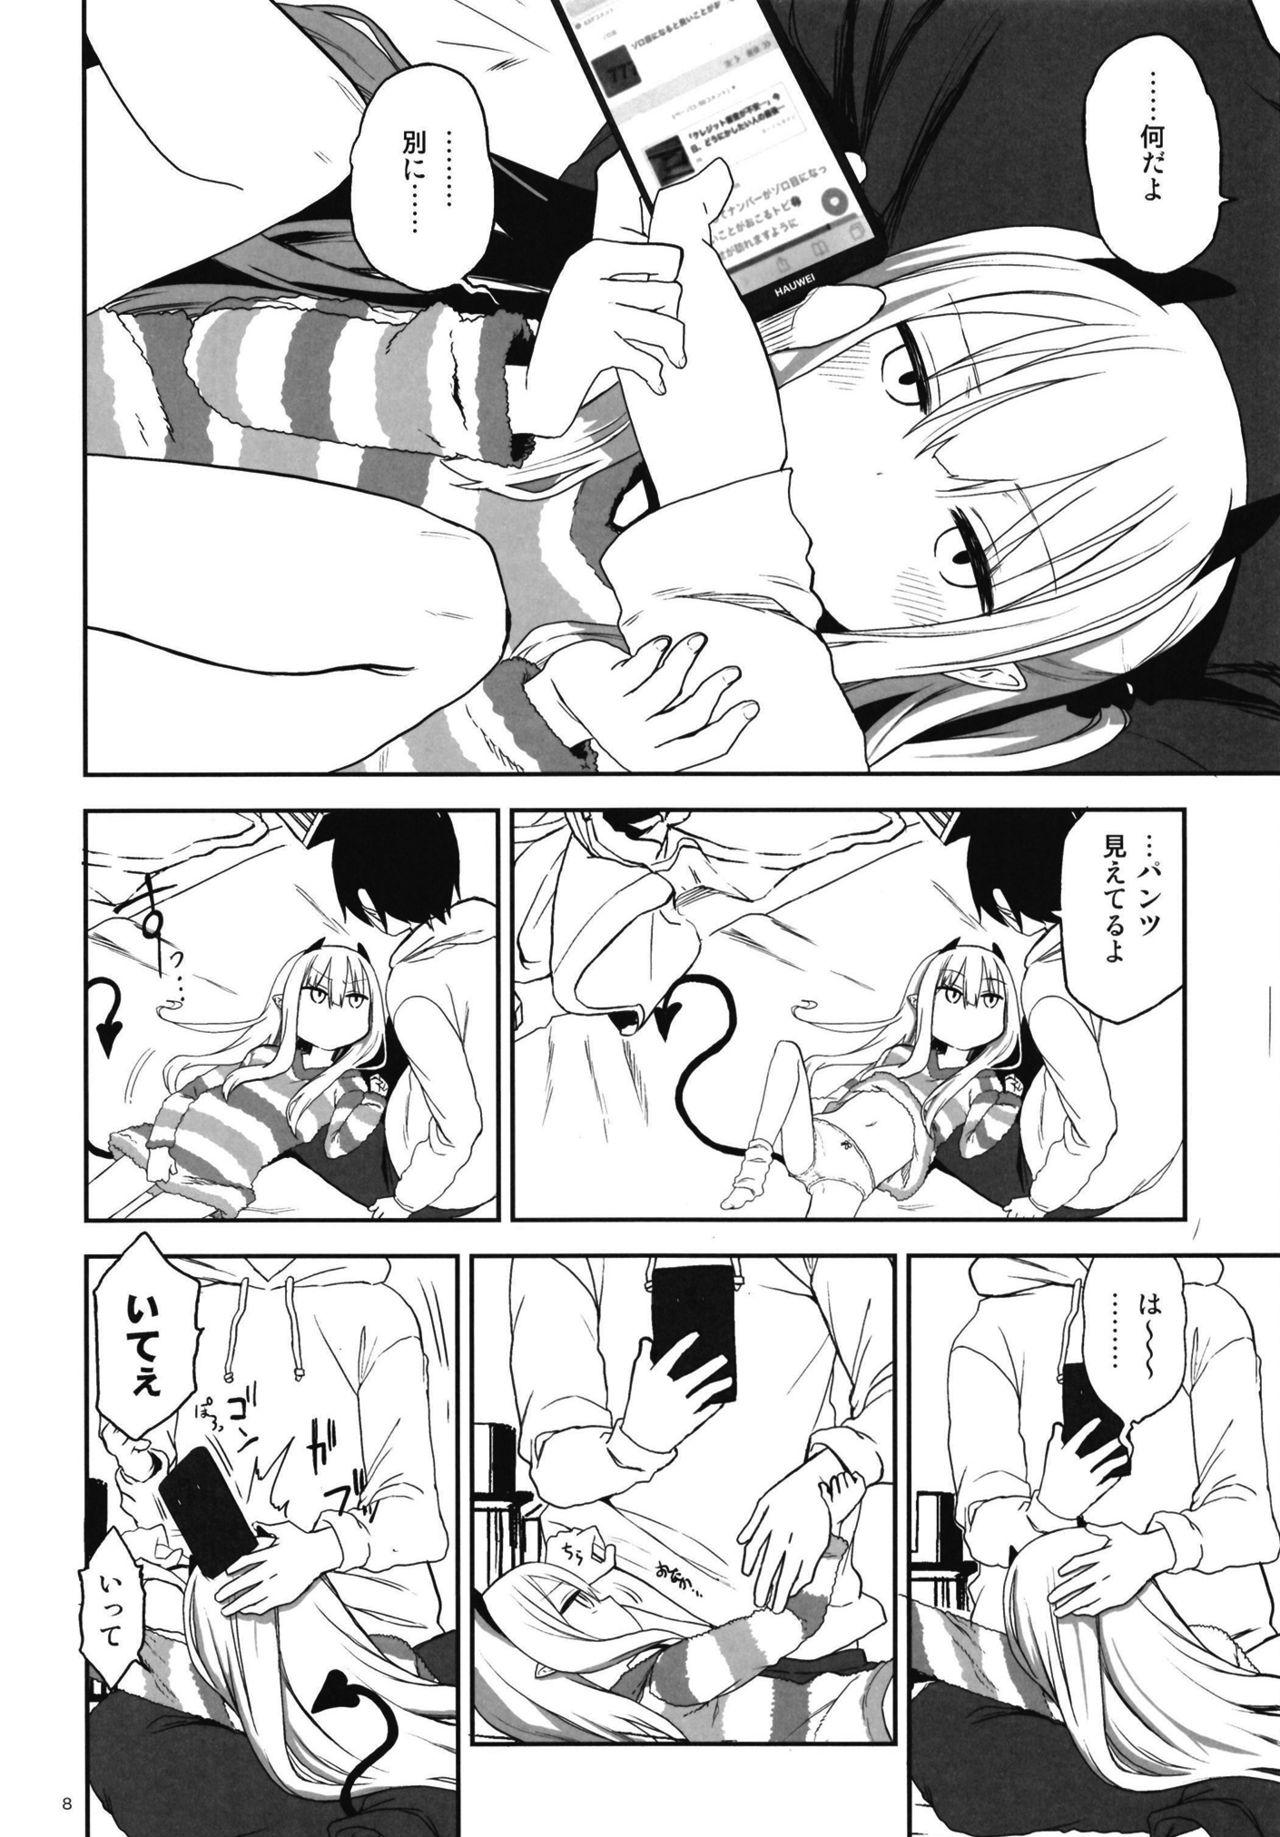 Eating Pussy Imouto wa Succubus - Original French Porn - Page 8